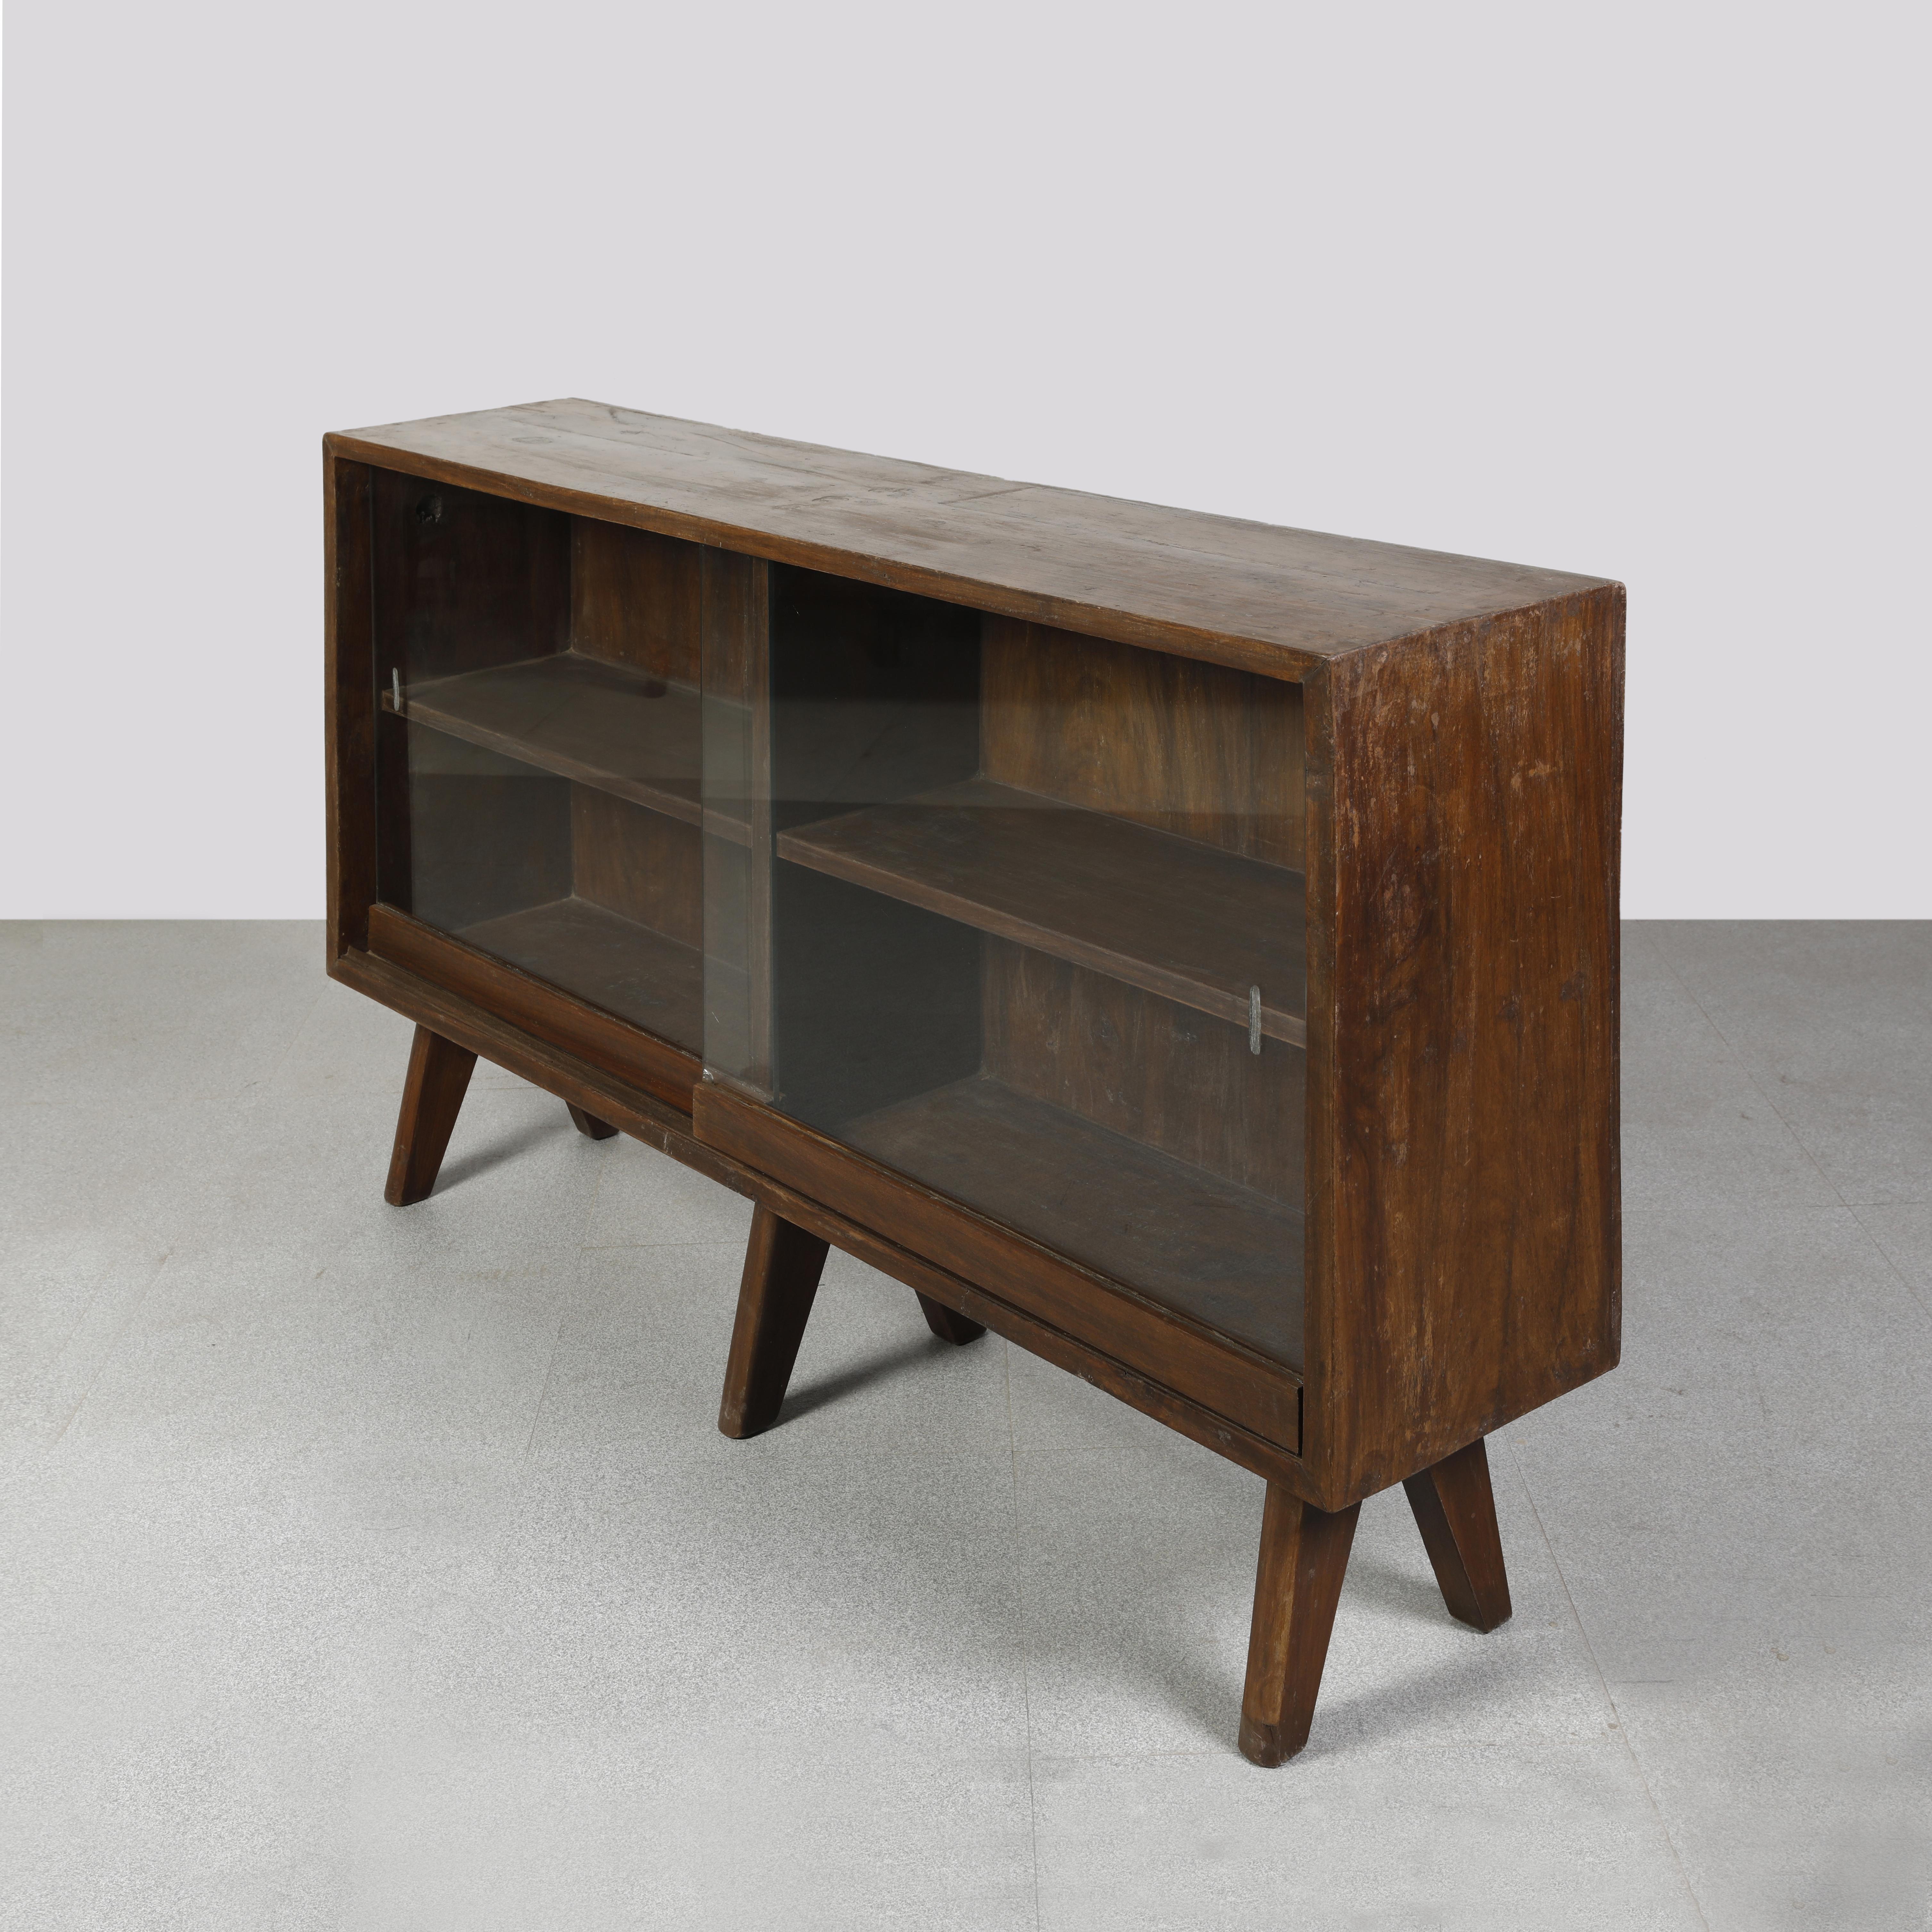 Indian Pierre Jeanneret PJ-R-13-A Glass-Fronted Bookcase / Authentic Mid-Century Modern For Sale